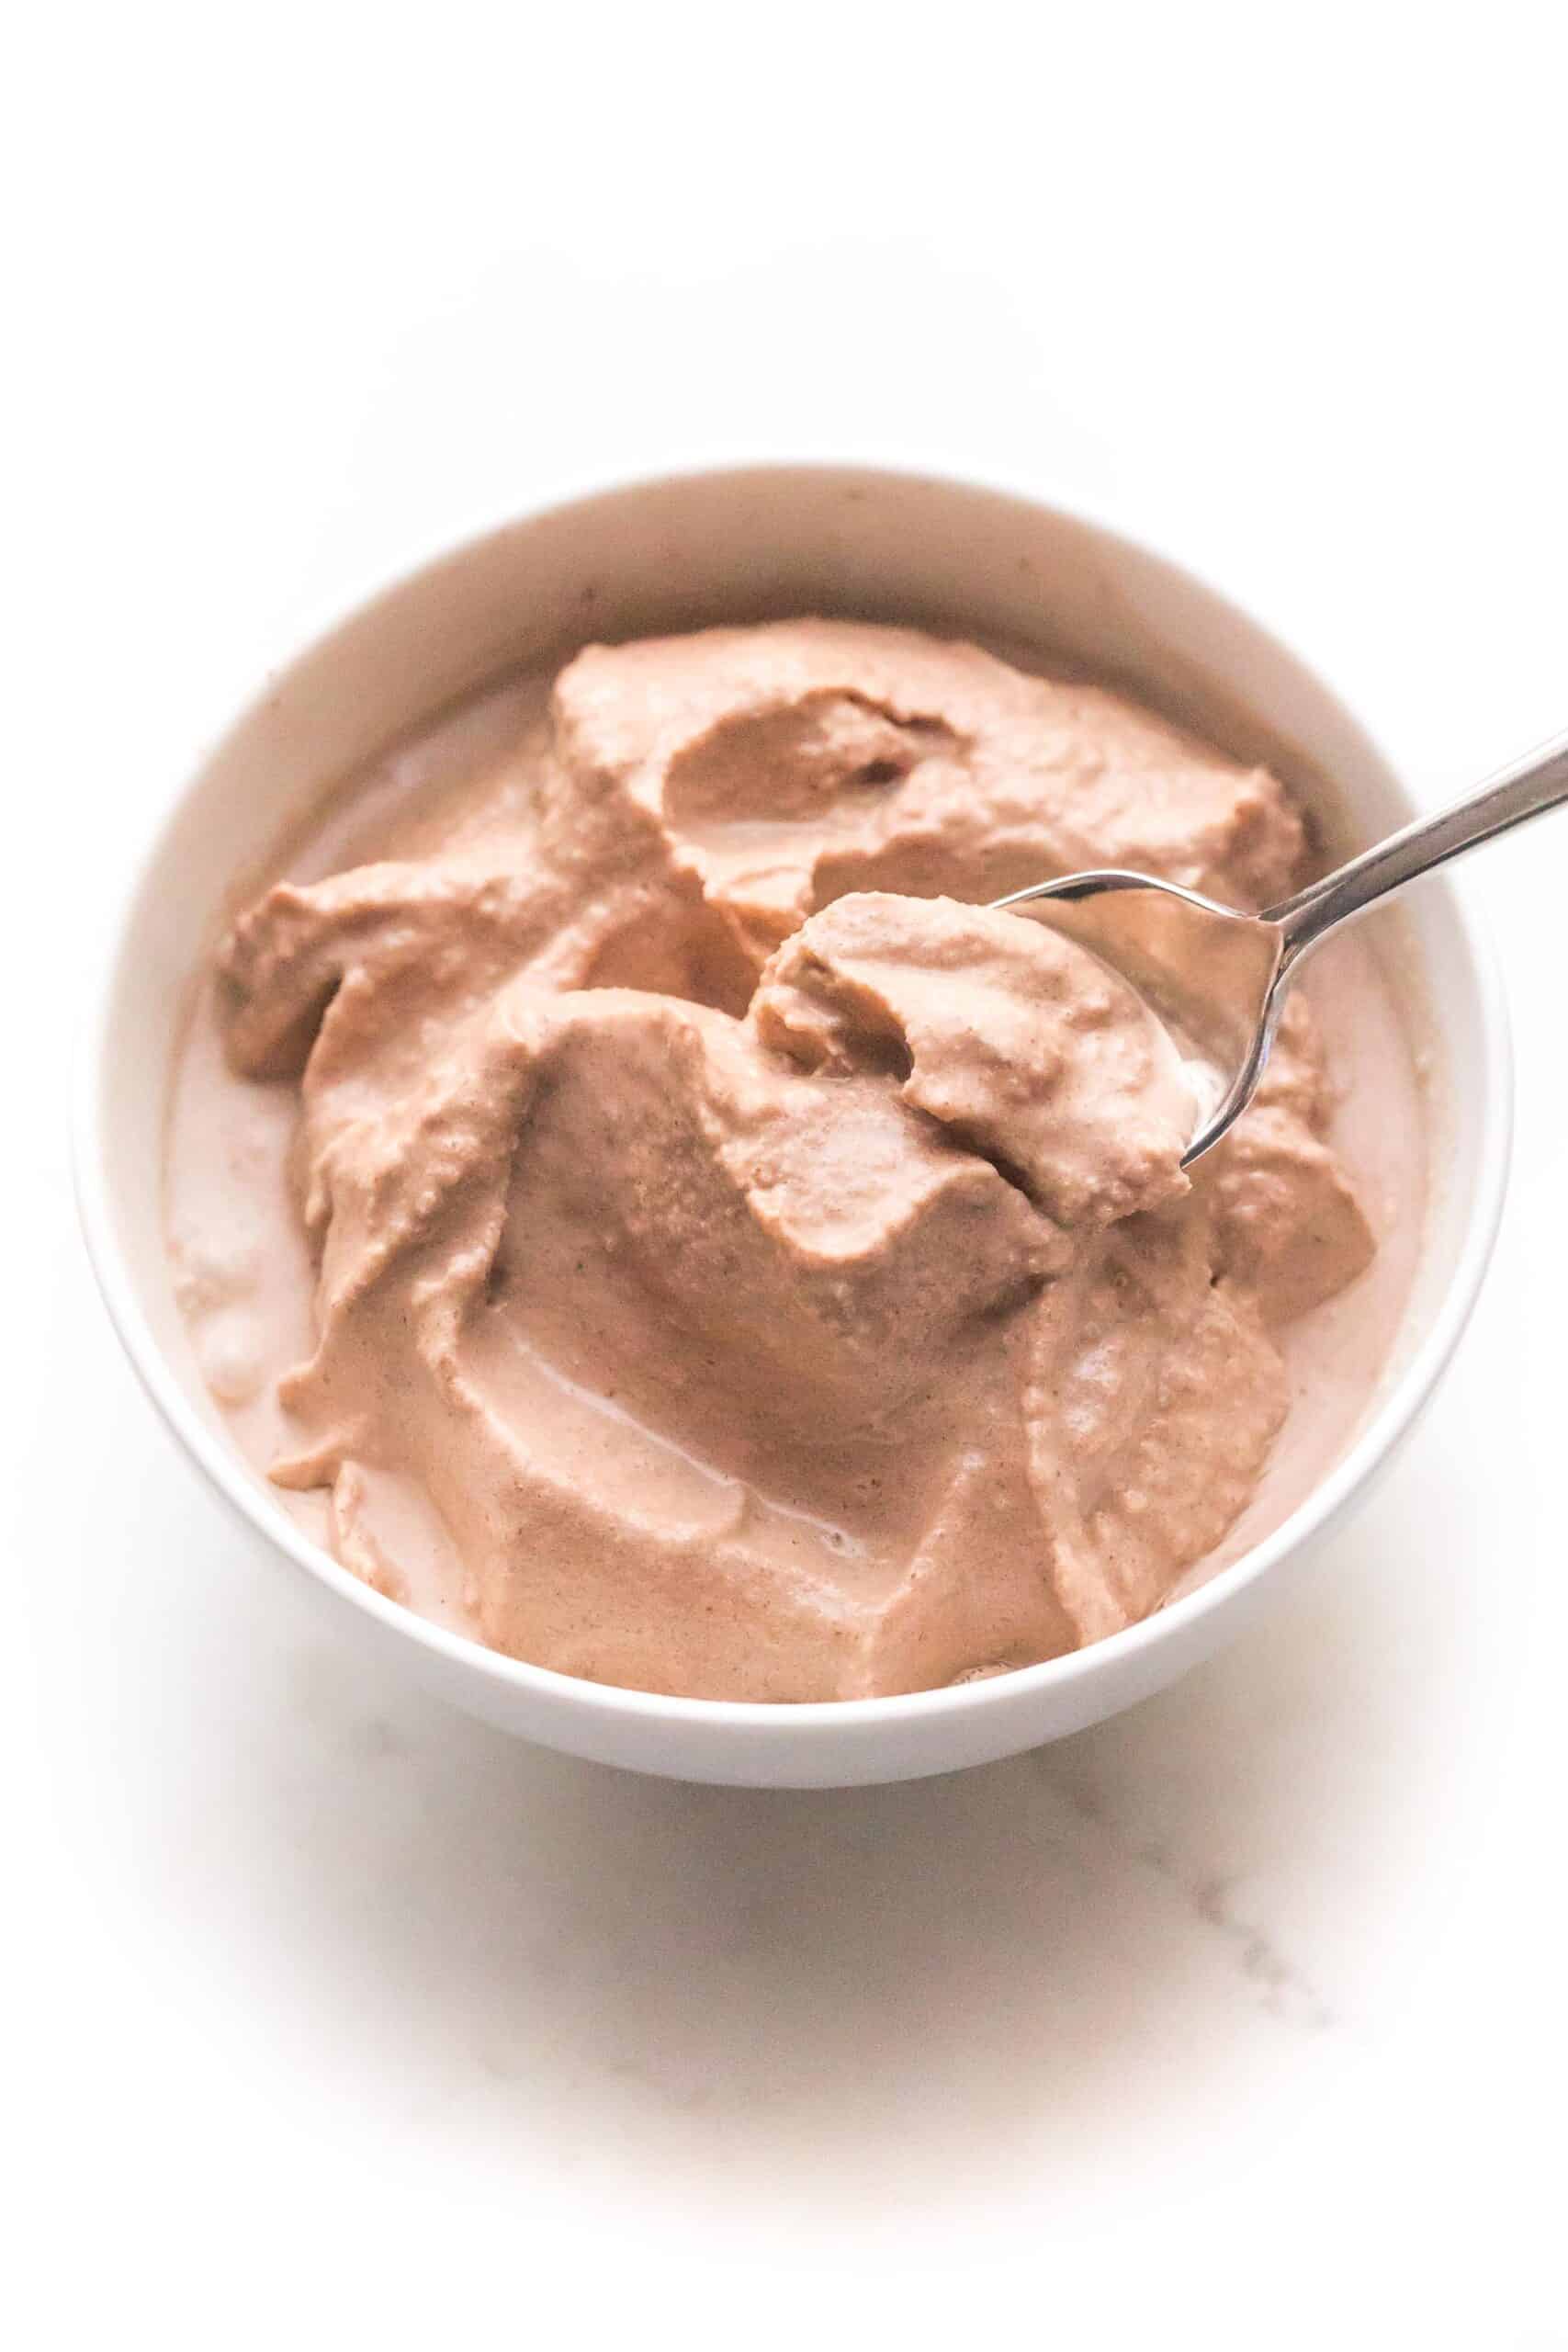 spoon in a chocolate frosty in a white bowl and background